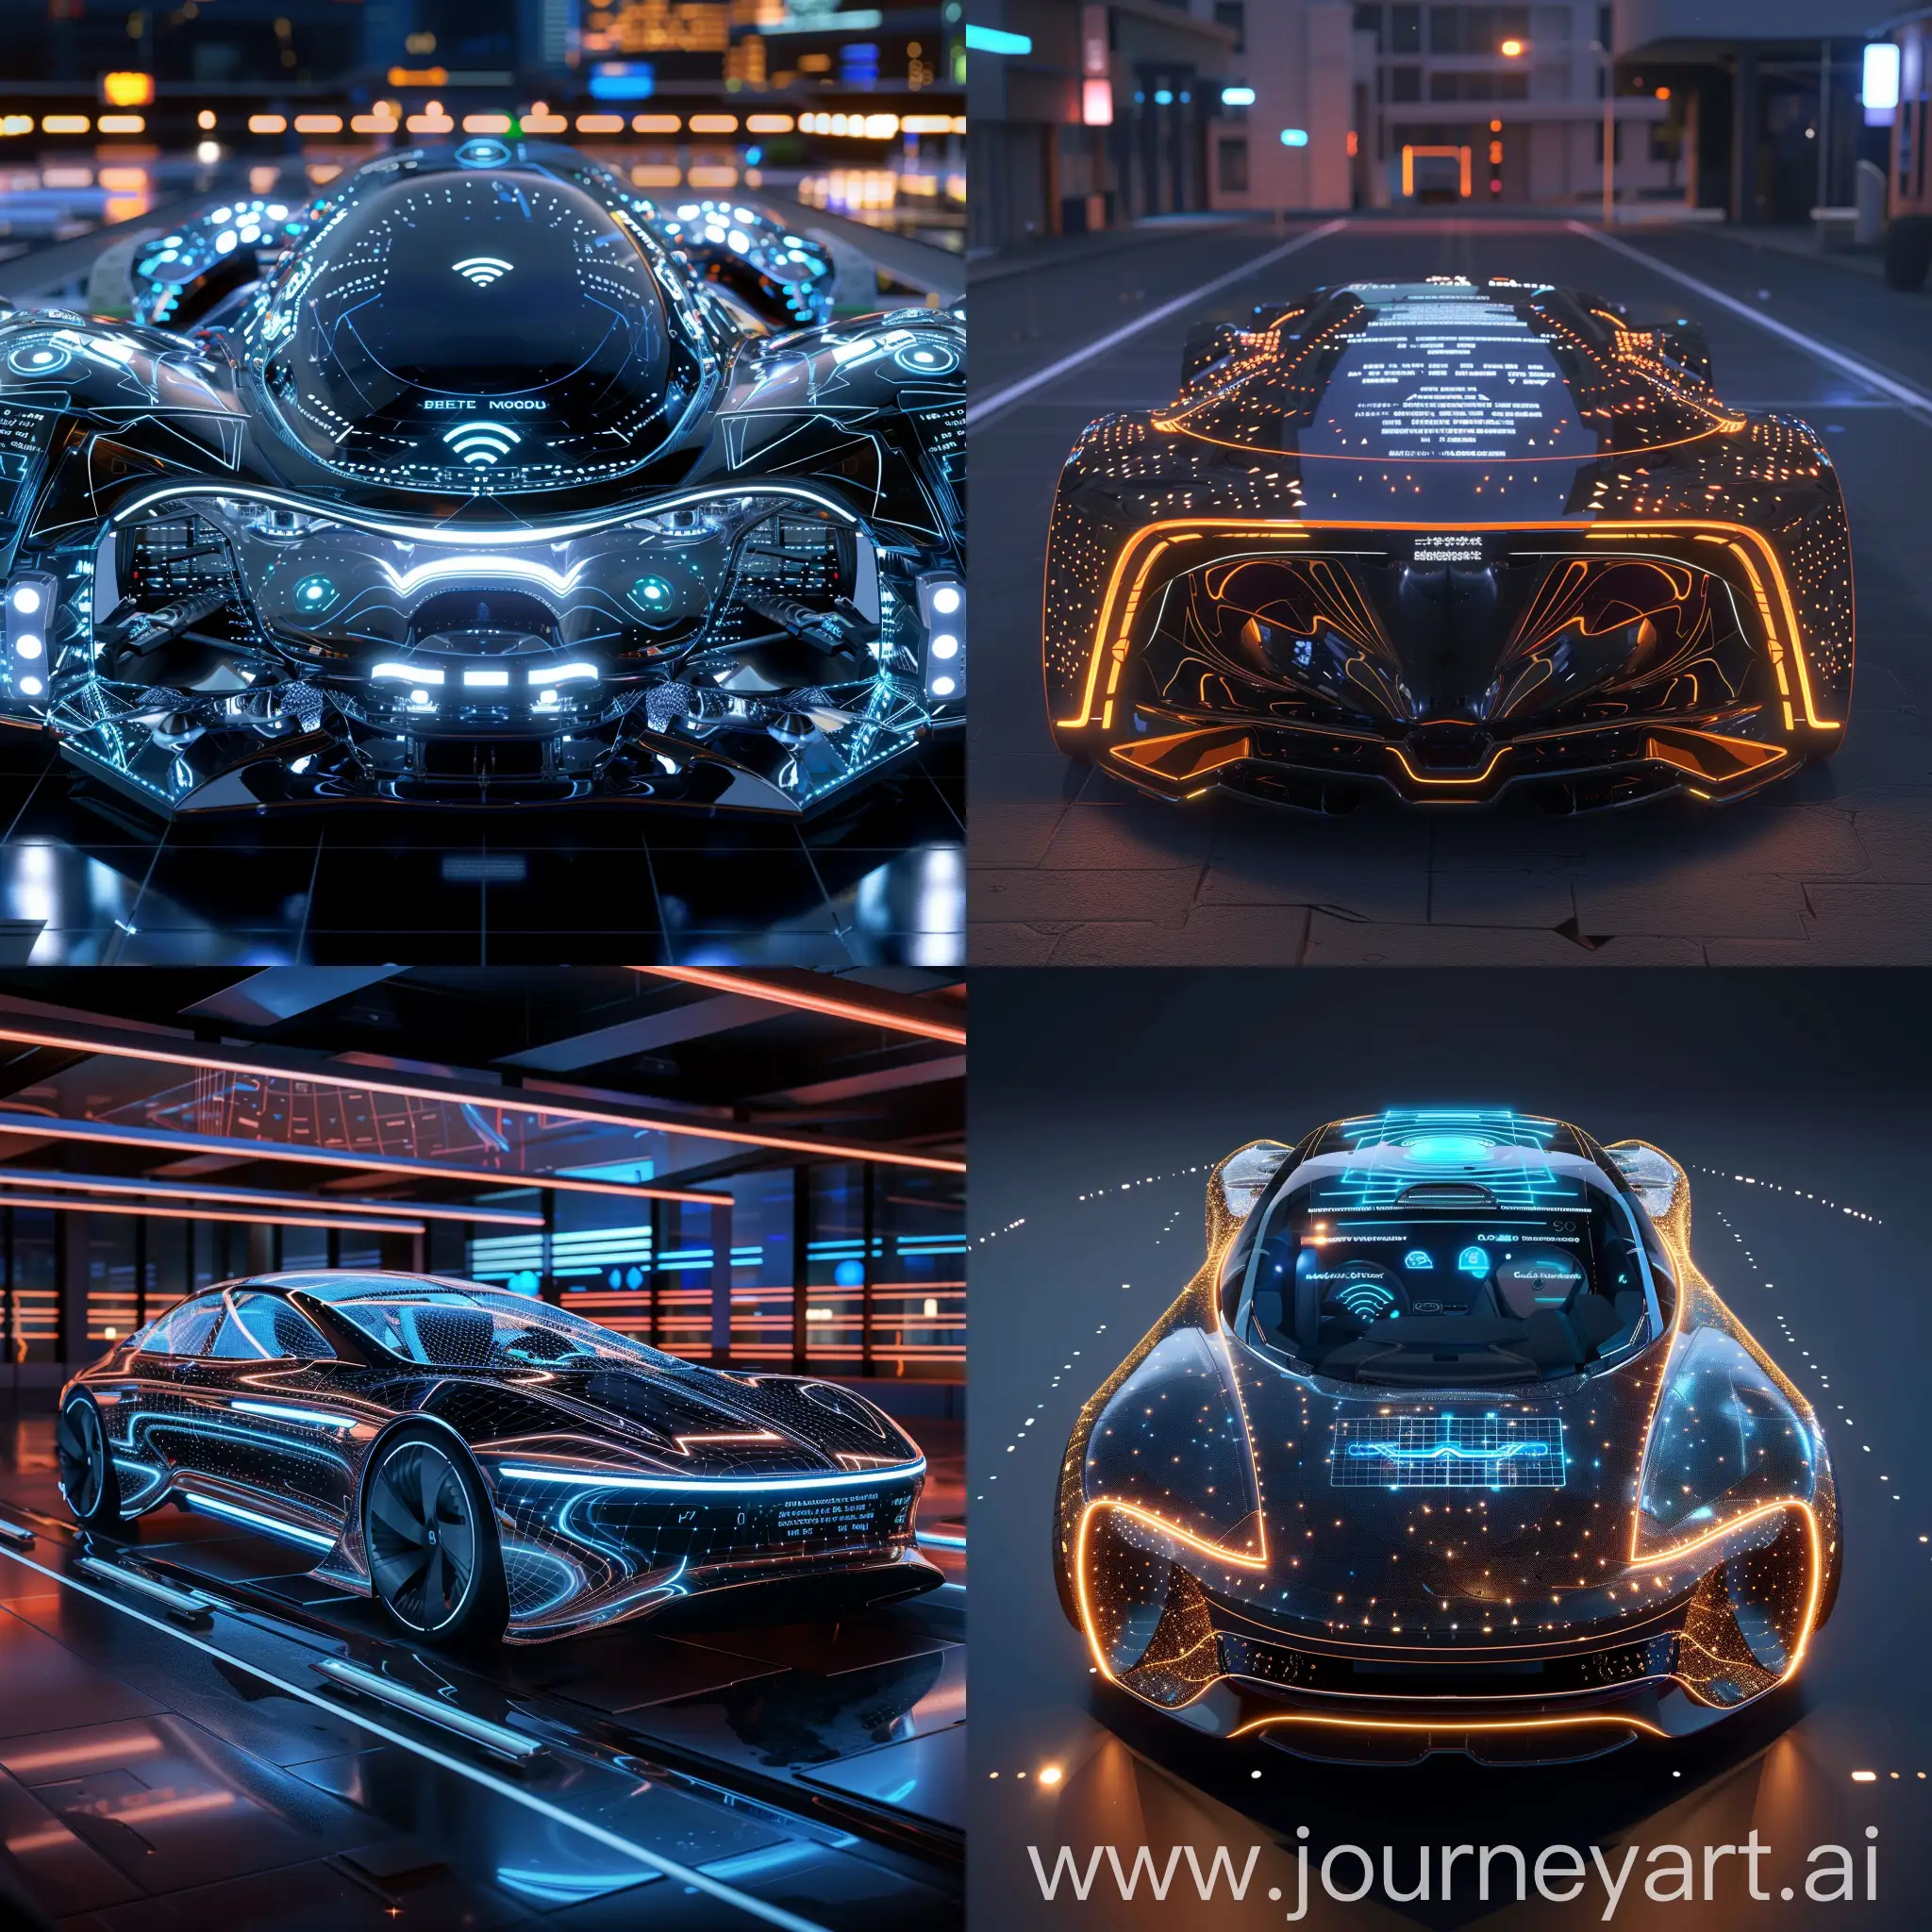 High-tech futuristic car, Holographic Heads-Up Display (HUD), Biometric Driver Identification, AI-Powered Virtual Assistant, Augmented Reality Windshield, Self-Healing Nanotechnology Surfaces, Wireless Charging Stations, Gesture-Controlled Interfaces, 360-Degree Camera System, Adaptive Mood Lighting, Intelligent Climate Control, Active Aerodynamic Elements, LED Matrix Lighting, Solar Panel Integration, Smart Auto-Cleaning Technology, Active Noise Cancellation, Retractable Camera Mirrors, Augmented Reality Windshield Display, Adaptive Active Suspension, Integrated Air Quality Sensors, Interactive Light Signatures, unreal engine 5 --stylize 1000